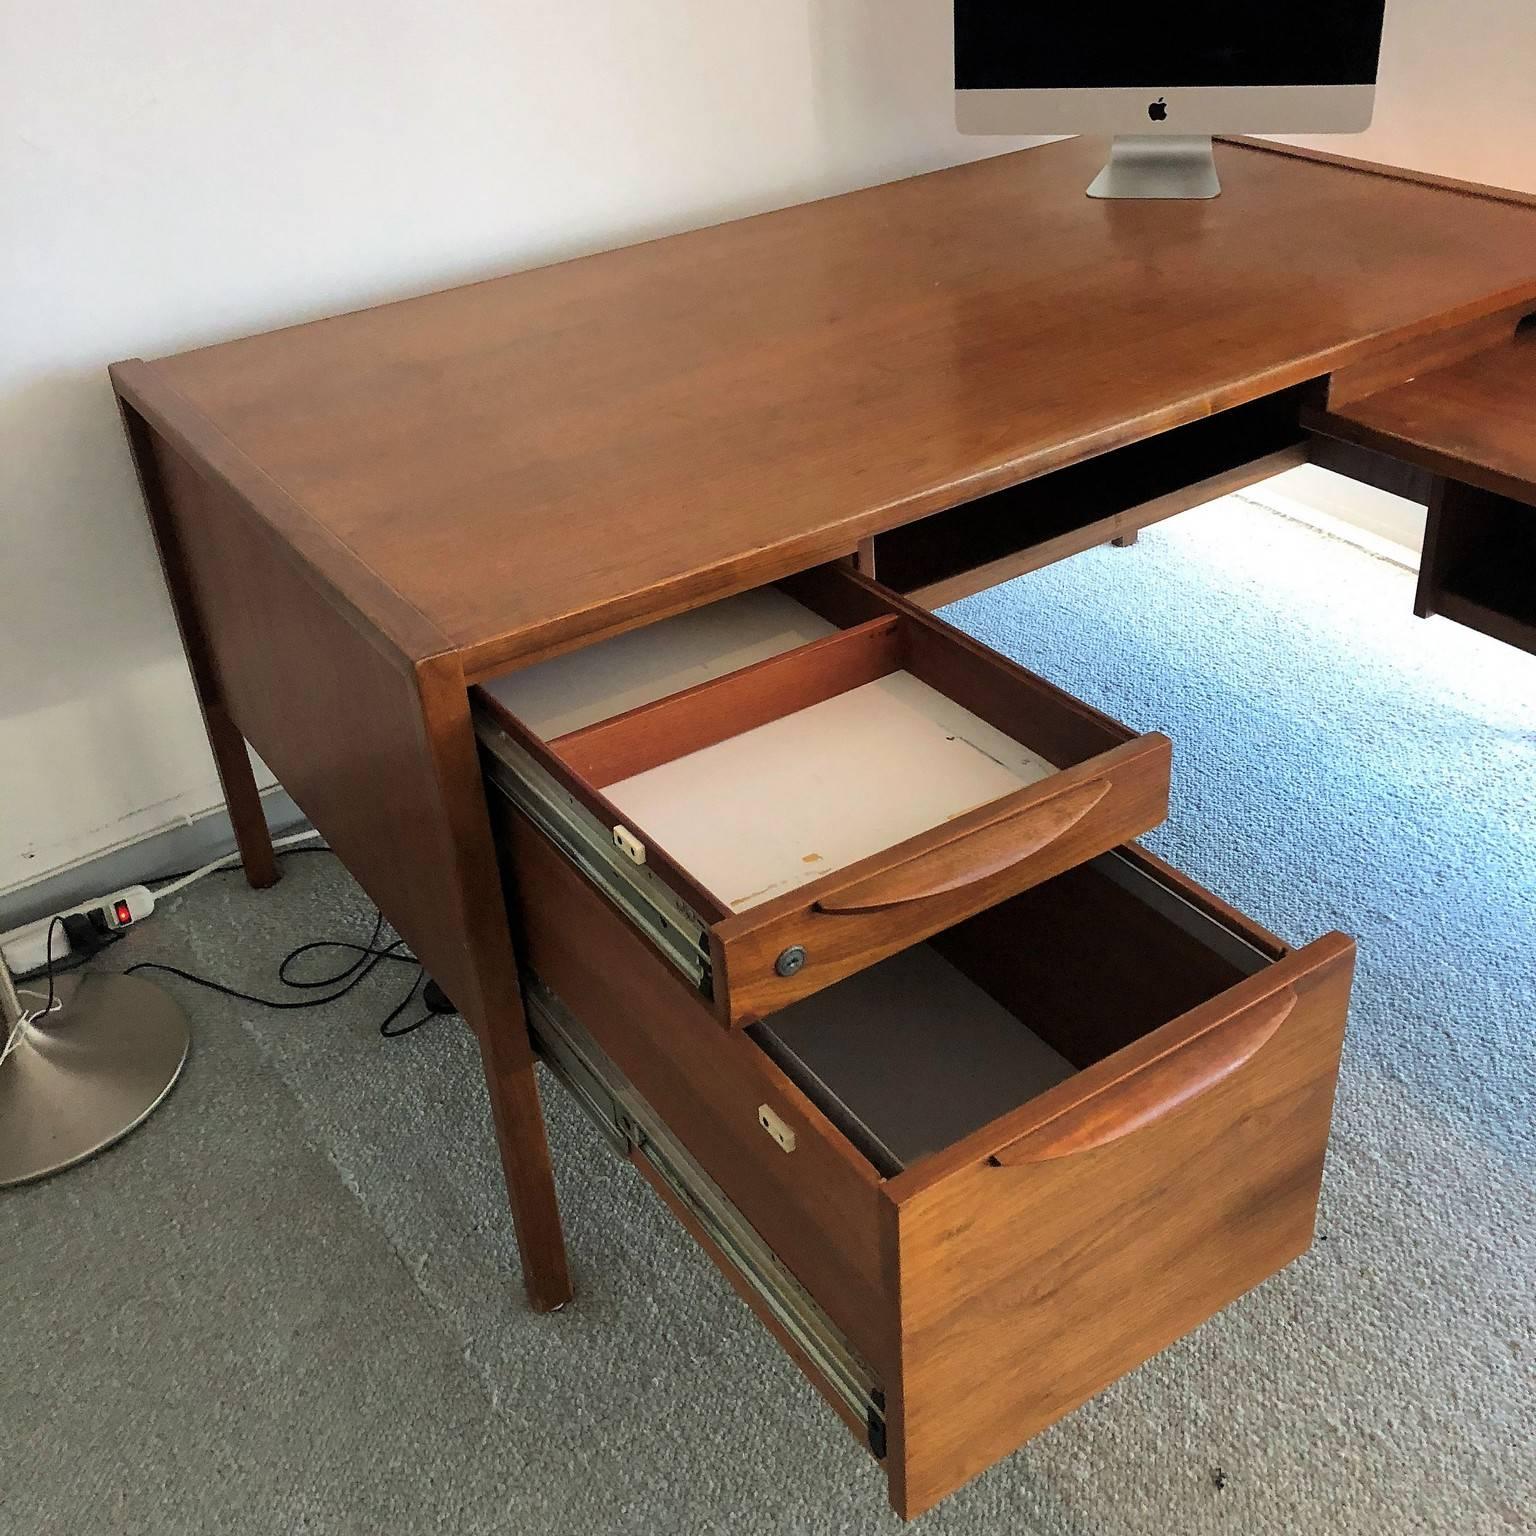 Midcentury American L-shaped designed desk by Jens Risom, teak wood with a under right side connected extension.
Finished back. Sculpted handles.
Great condition.